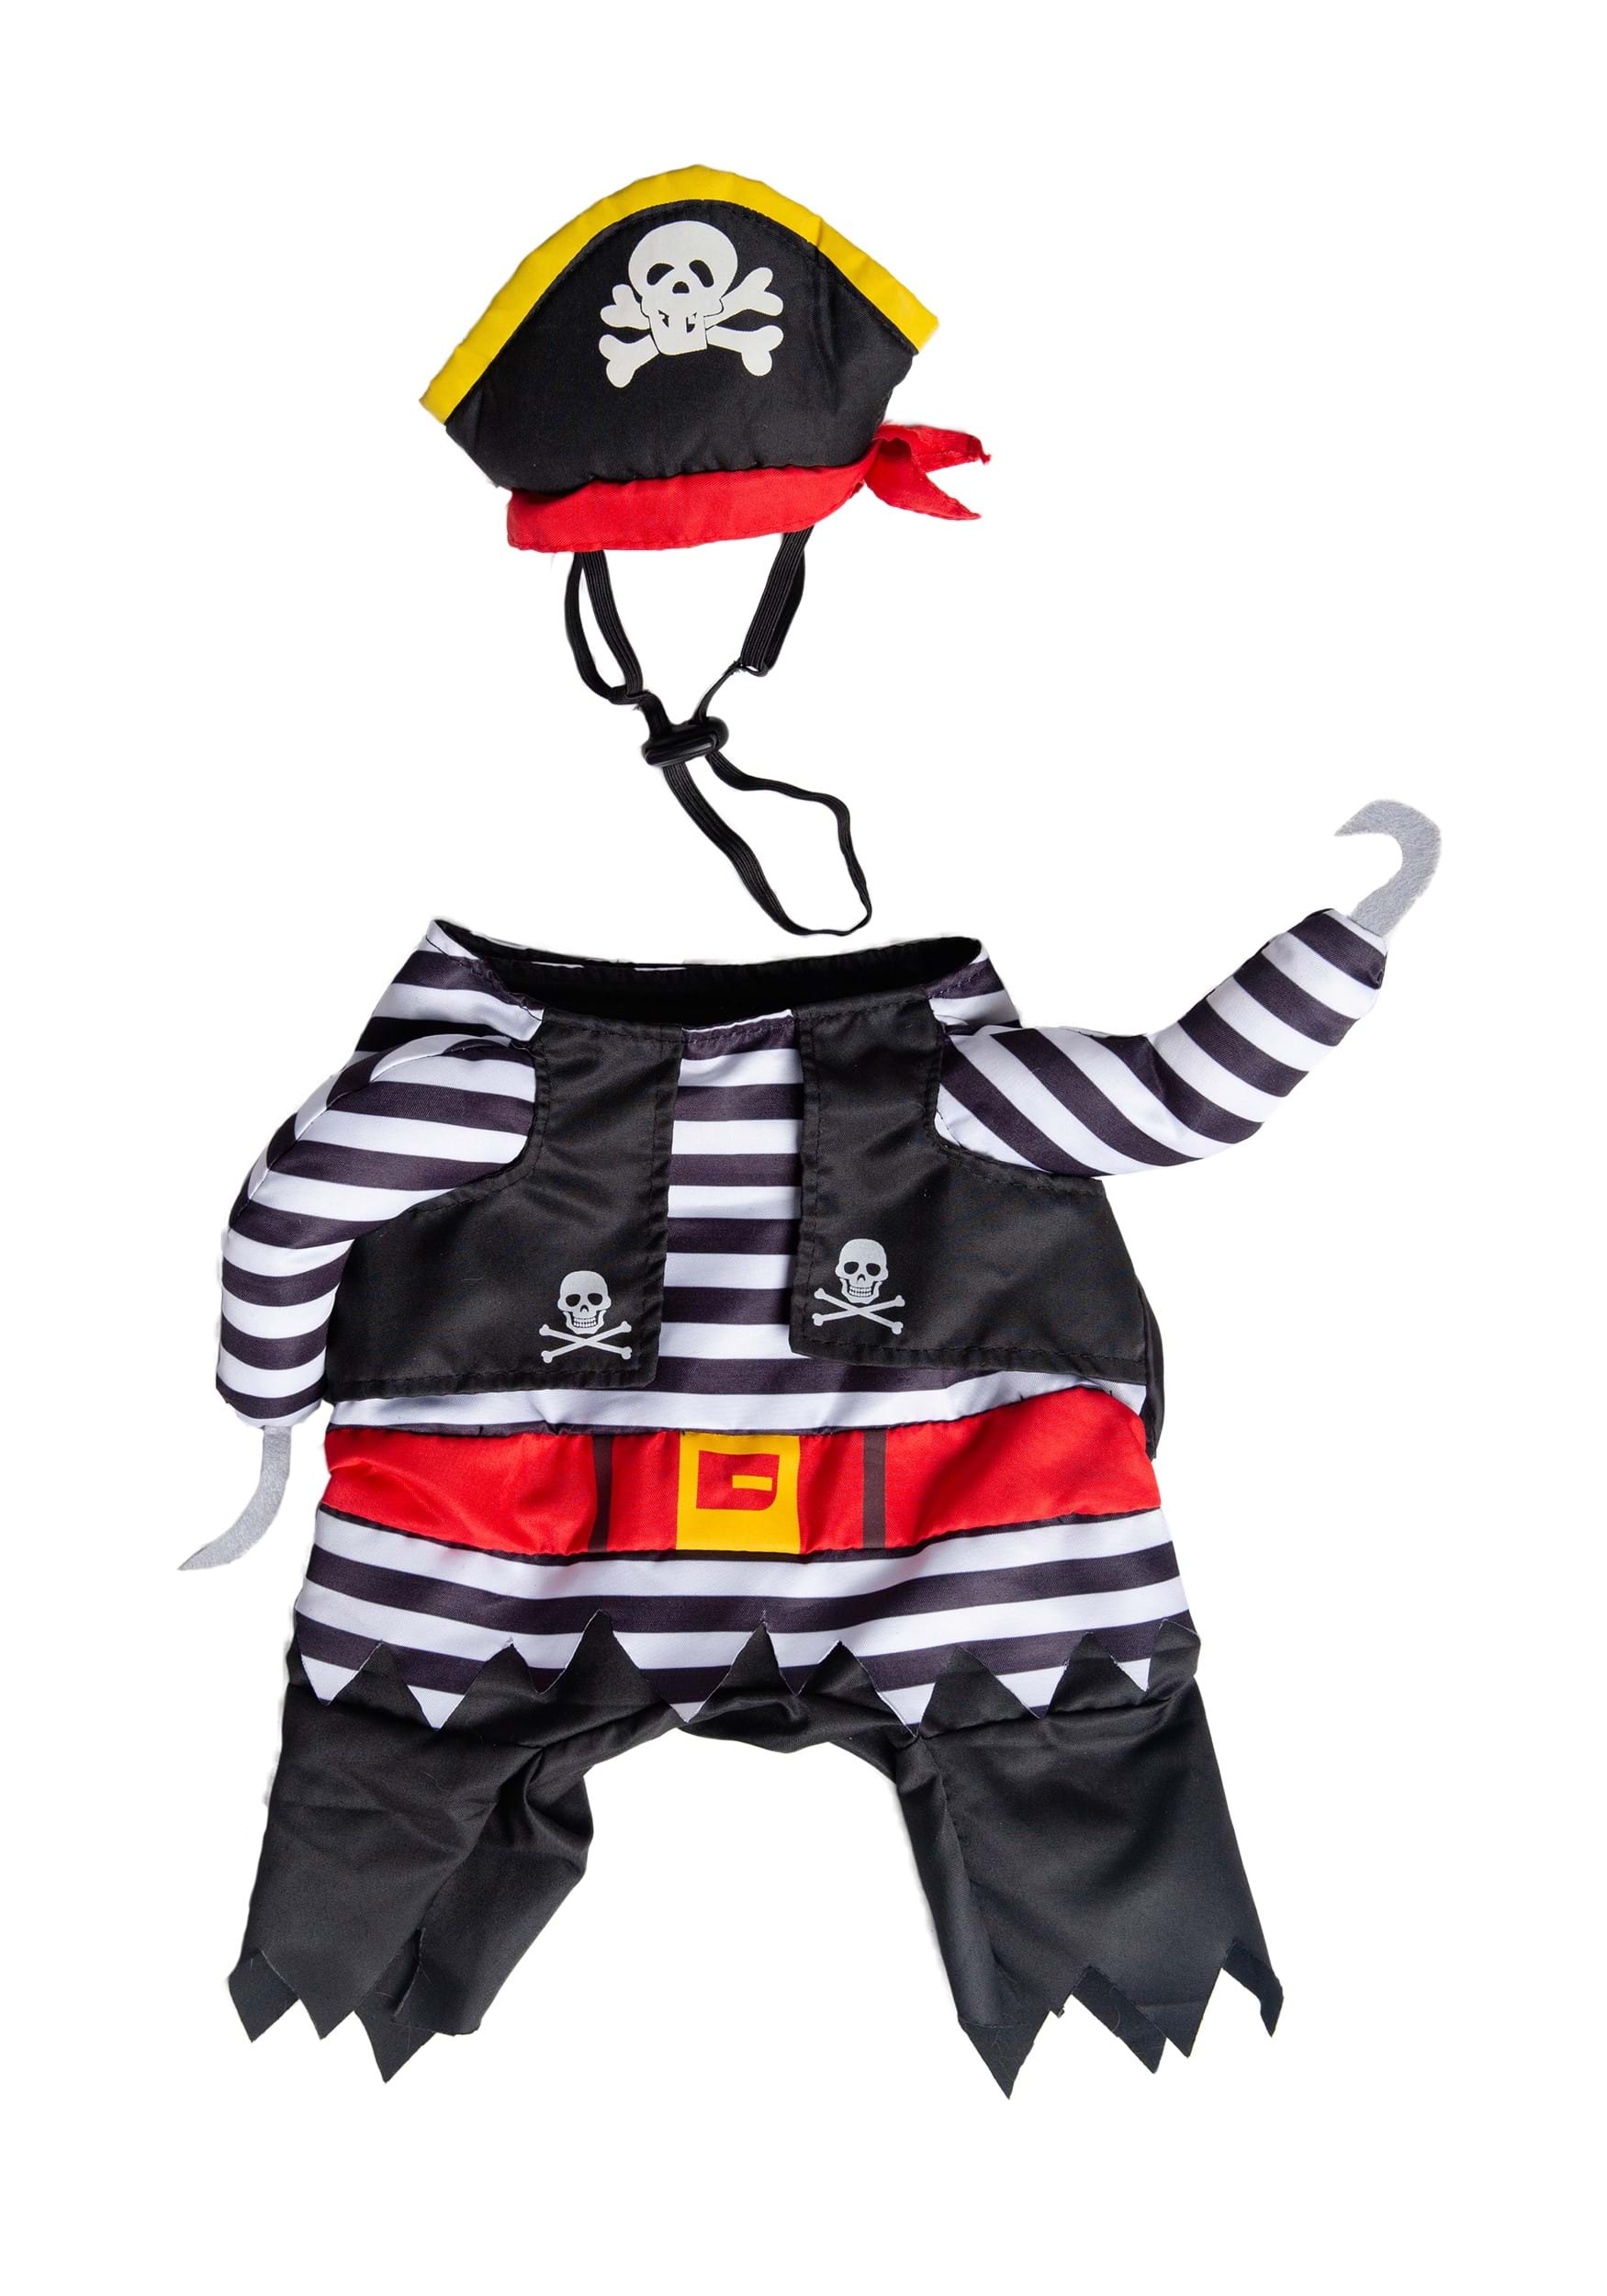 Pirate Costume For Pets